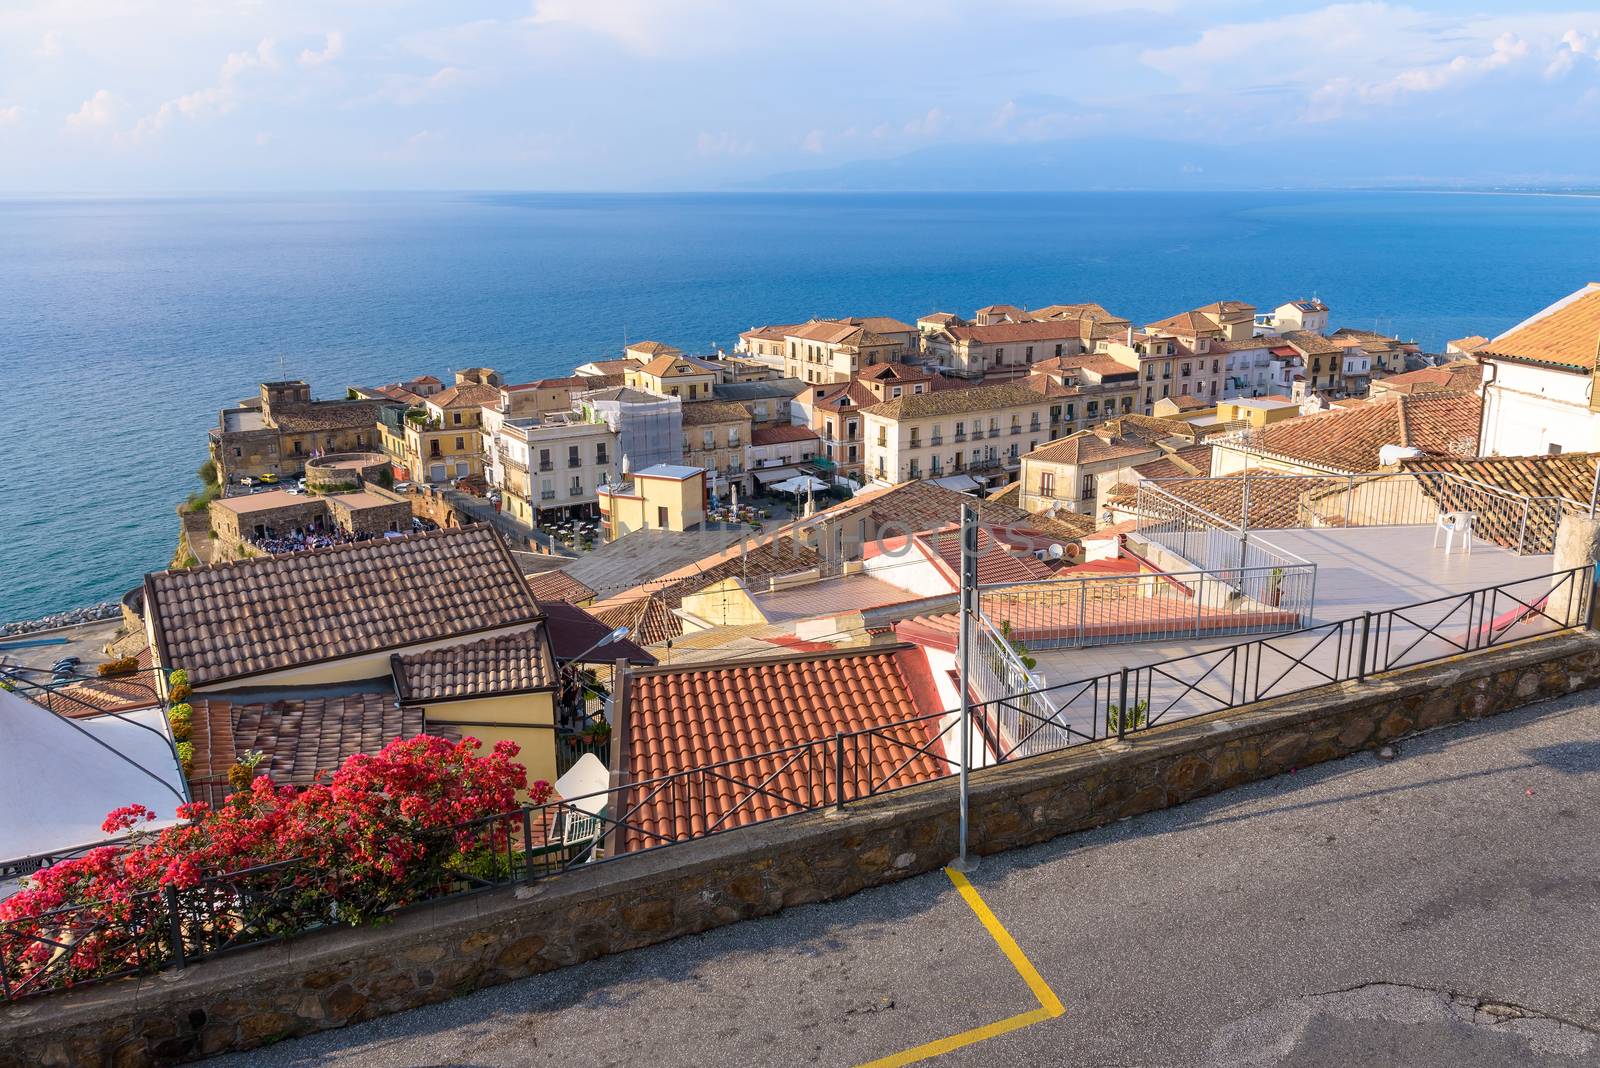 Aerial view of rooftops of Pizzo town in Calabria, southern Italy